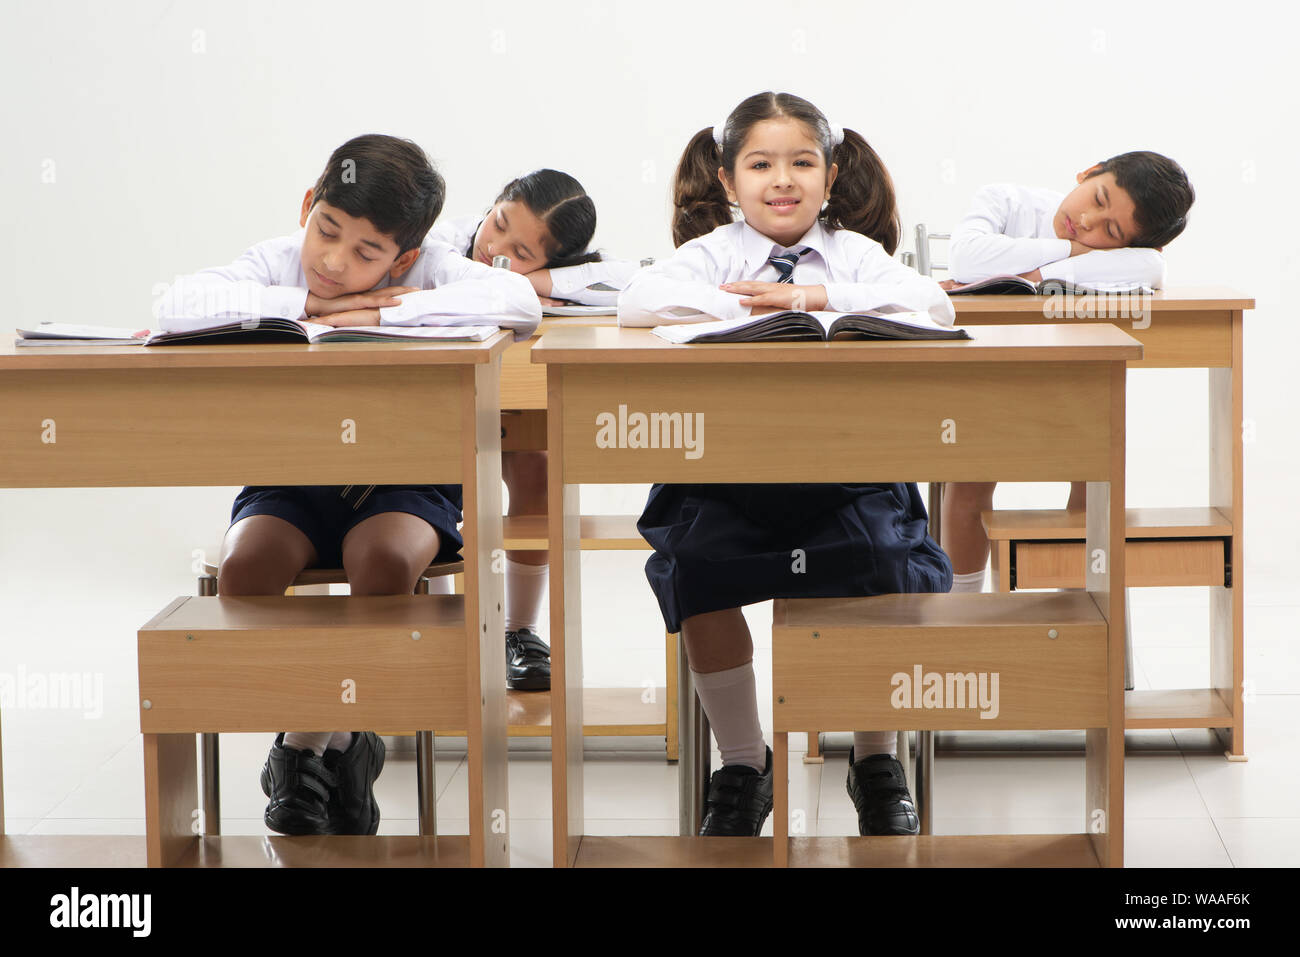 Sleeping students and diligent pupil in a school classroom Stock Photo